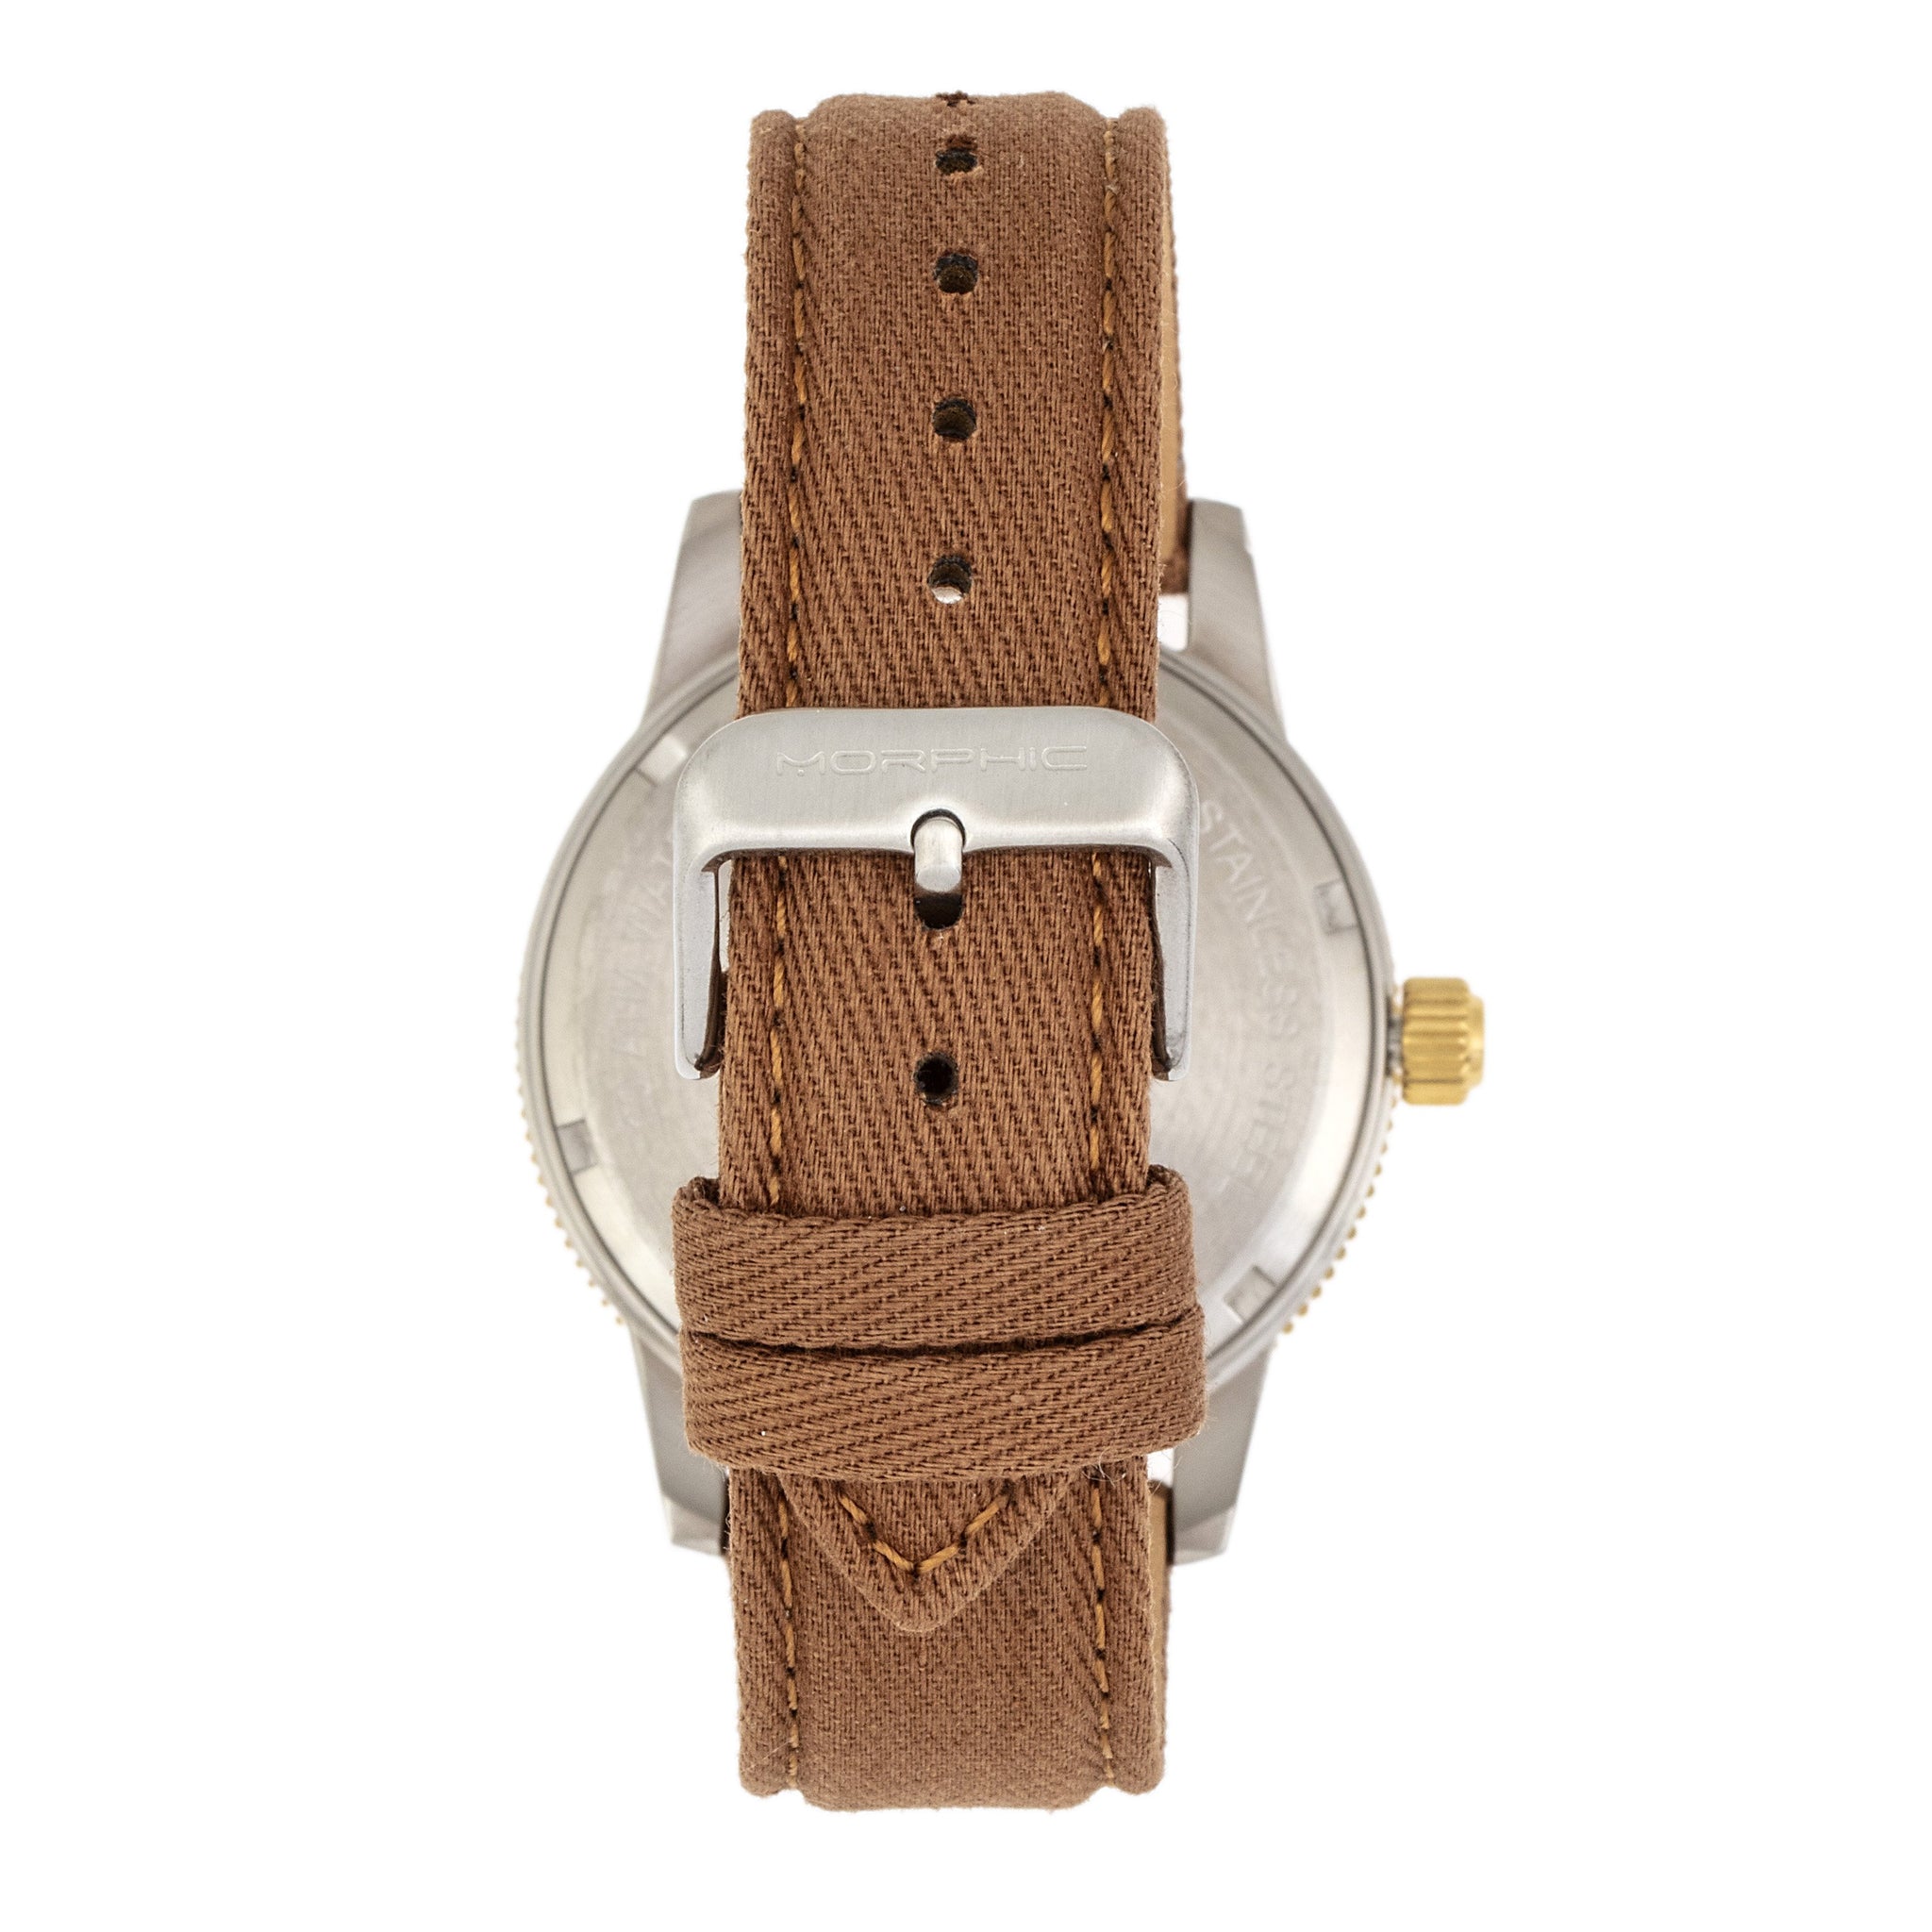 Morphic M85 Series Canvas-Overlaid Leather-Band Watch - Gold/Brown - MPH8501